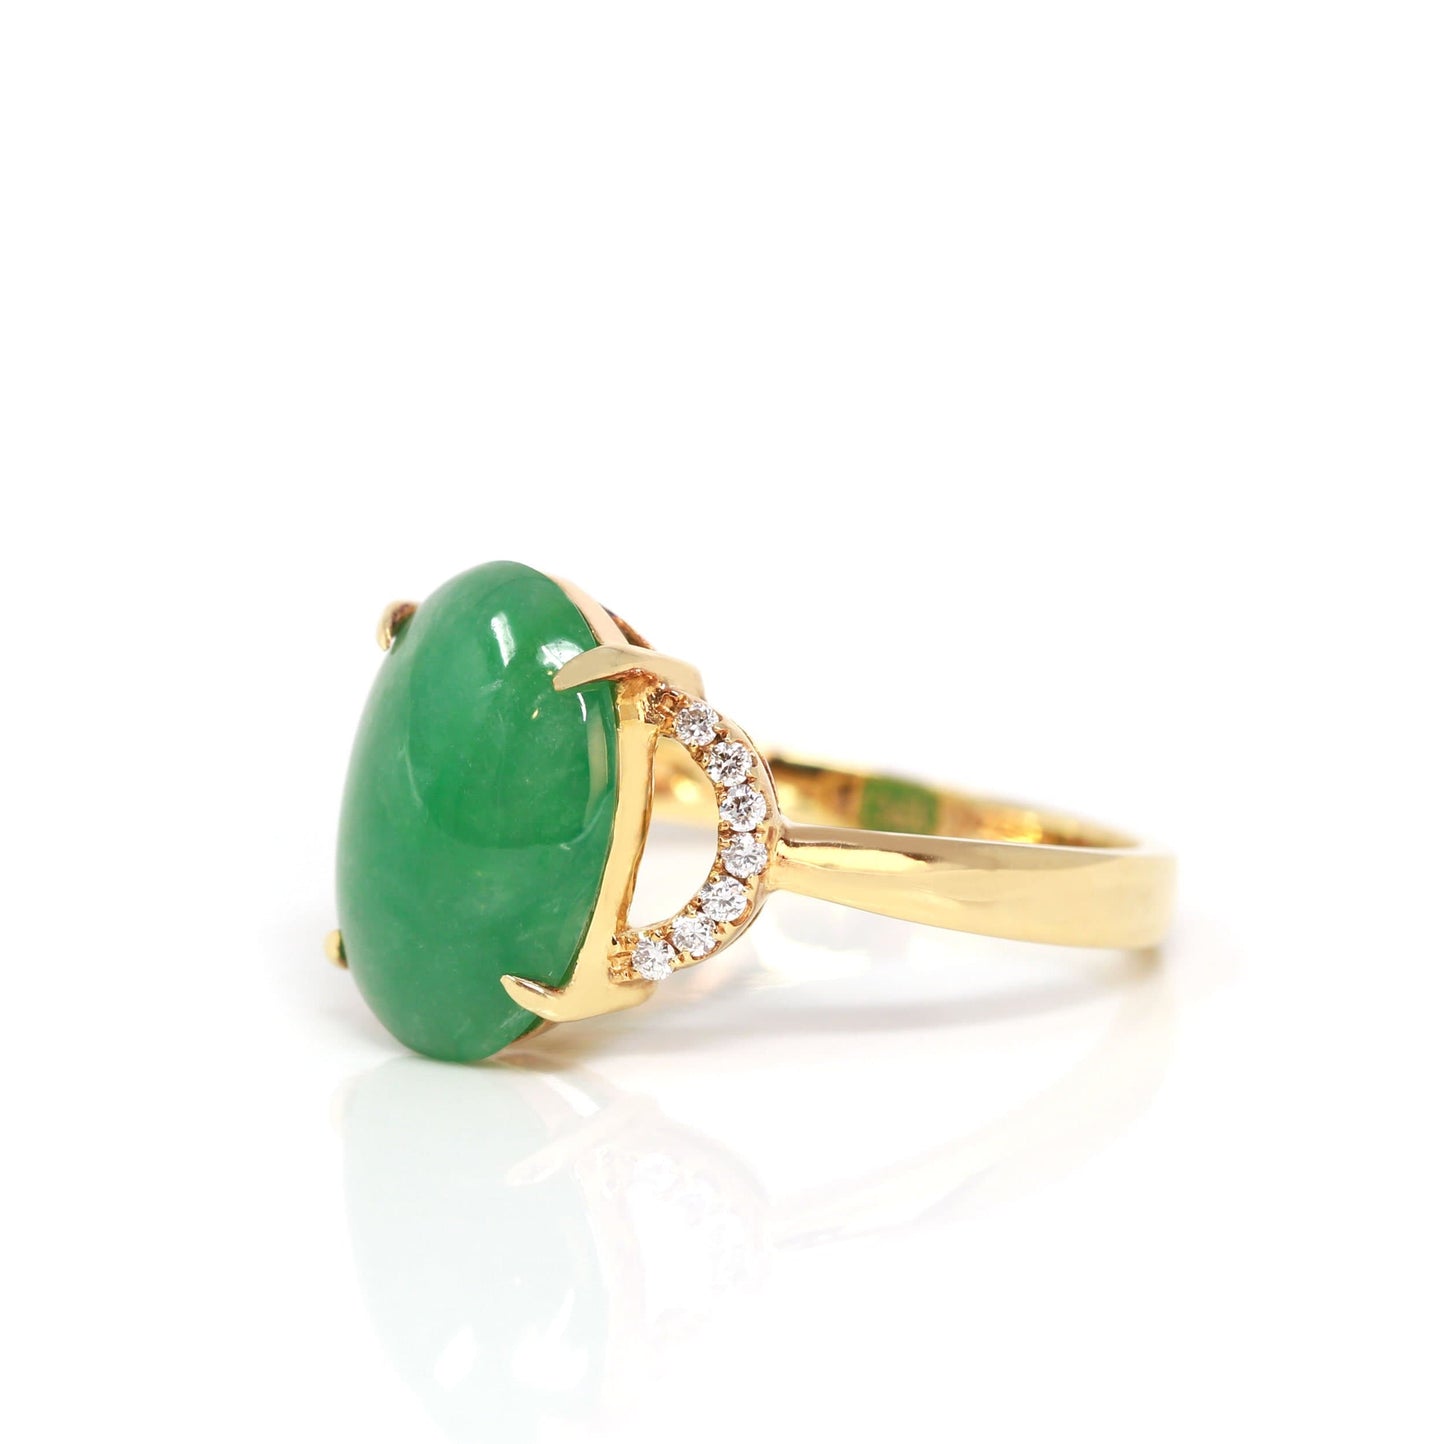 RealJade® "Marie" 18k Rose Gold Natural Green Imperial Jadeite Ring With Diamonds